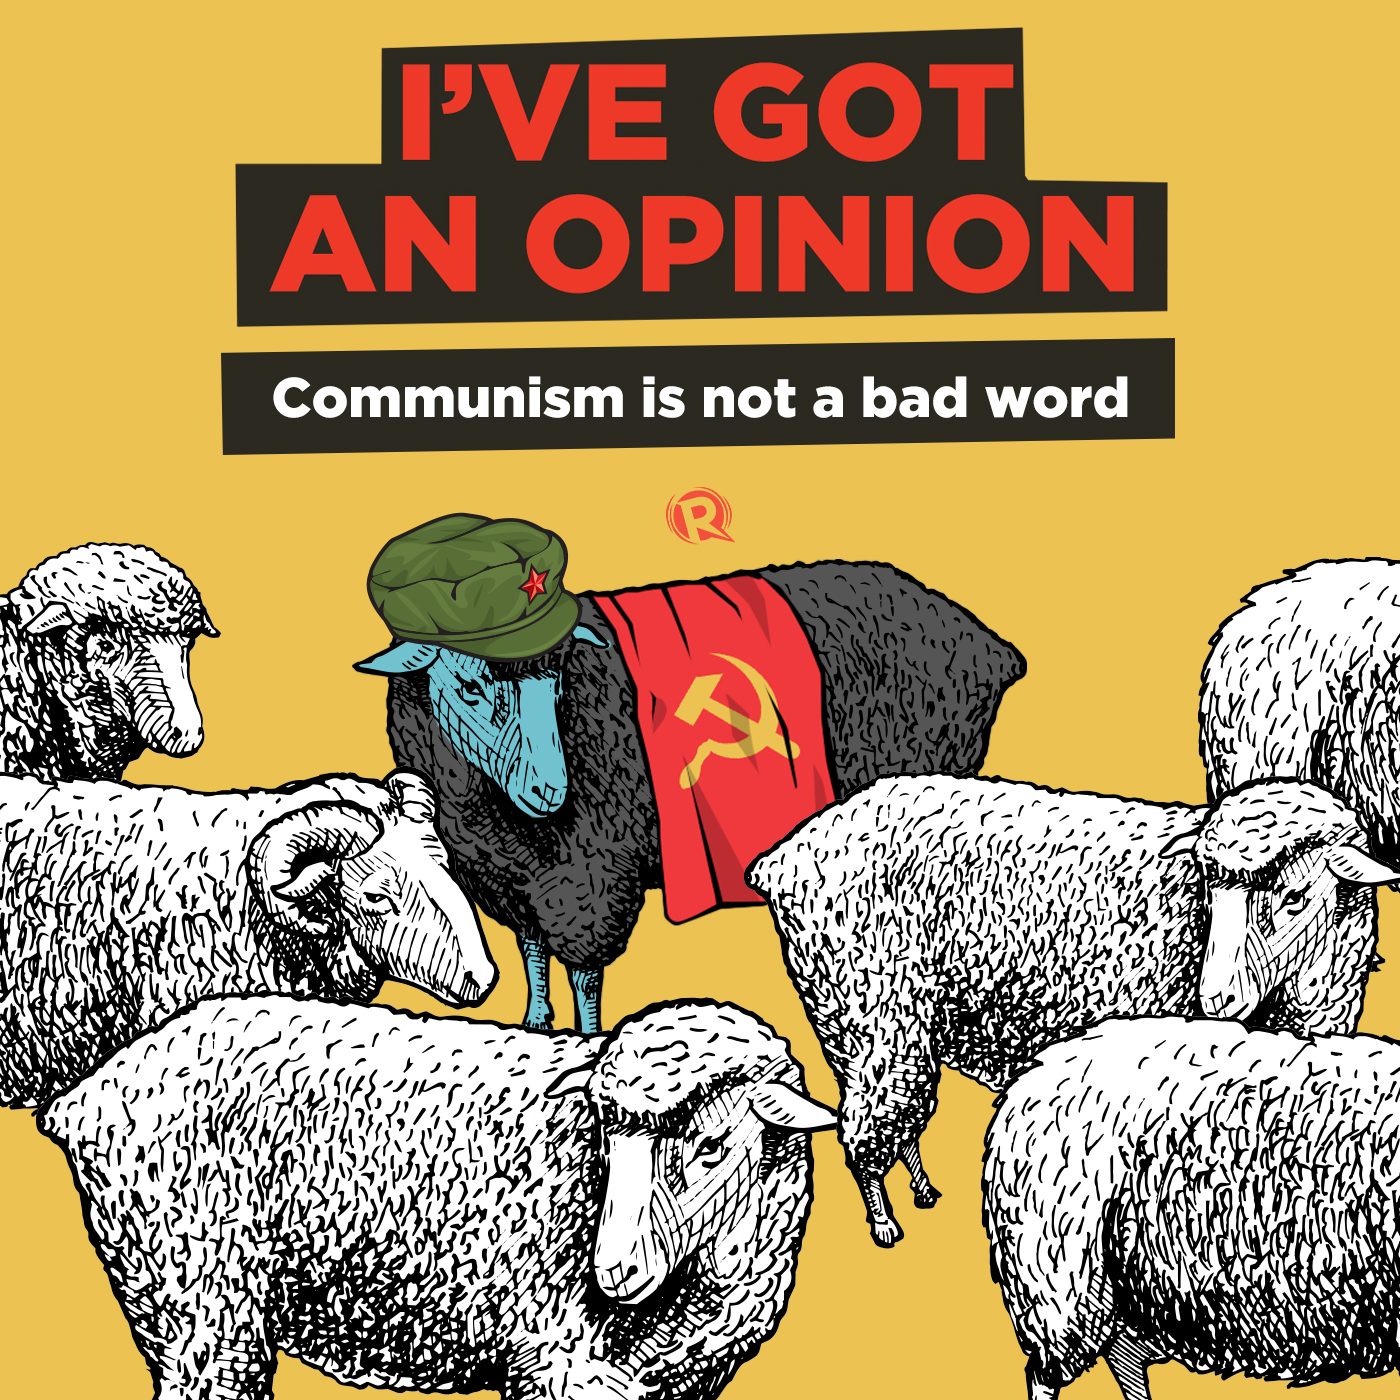 [PODCAST] I’ve Got An Opinion: Communism is not a bad word